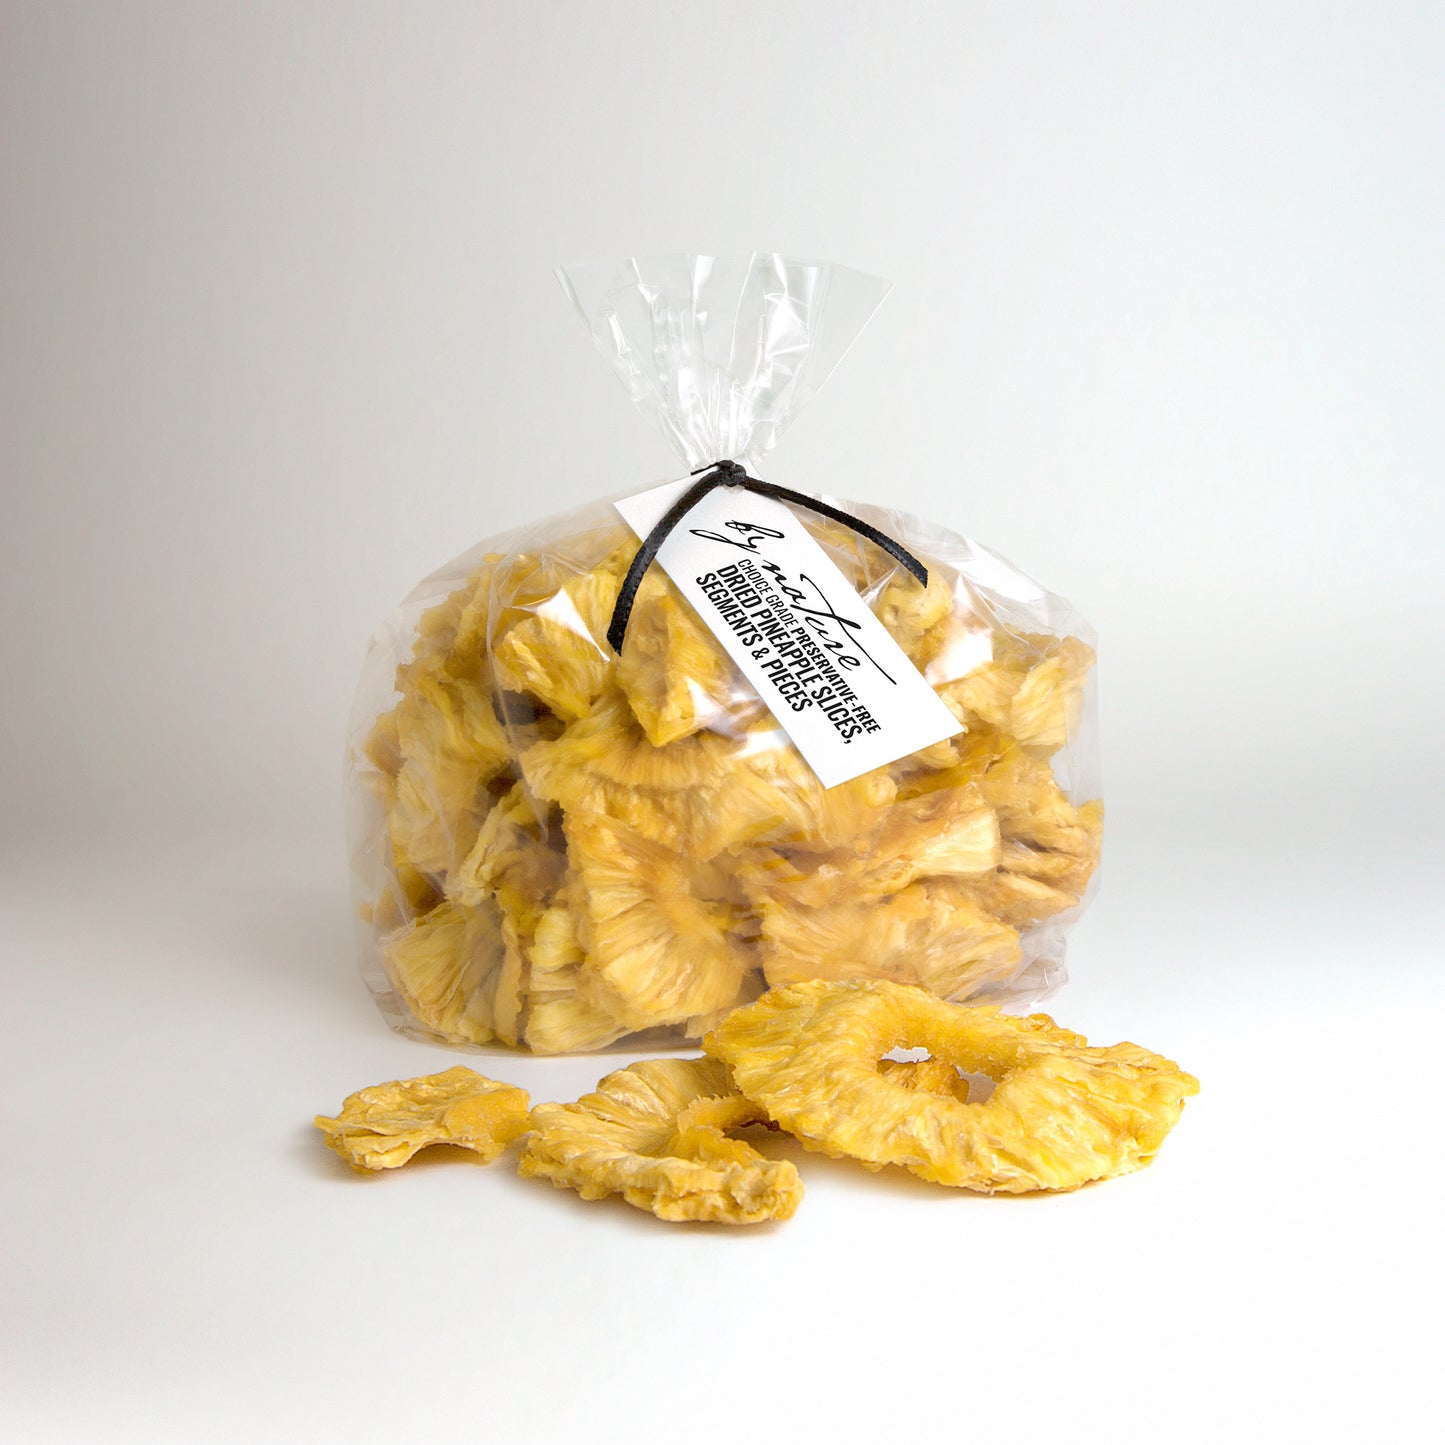 BY NATURE Dried Pineapple Pieces, 500g - preservative-free.